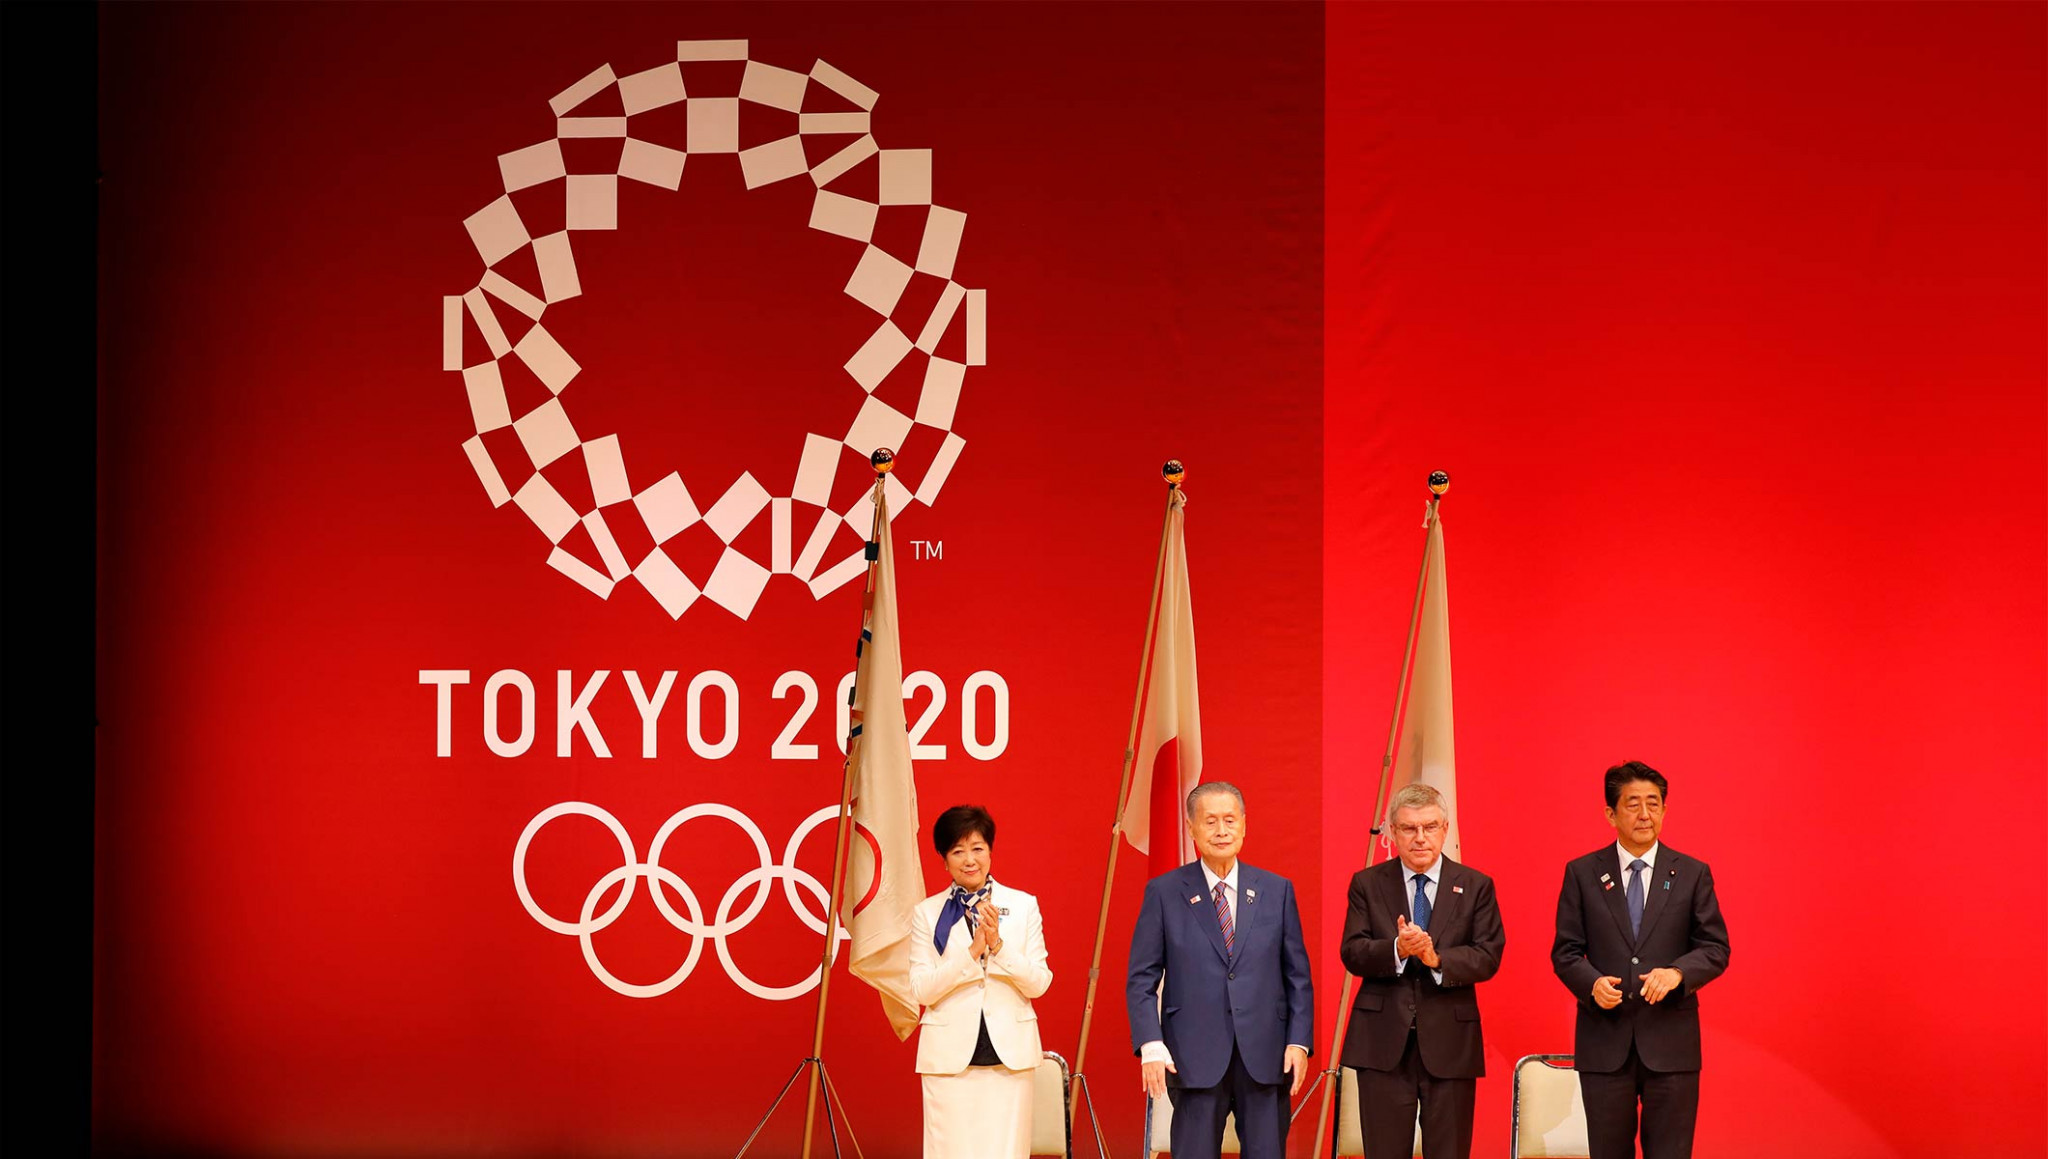 Tokyo has today held celebrations to mark one year to go until the 2020 Olympic Games ©IOC/Greg Martin